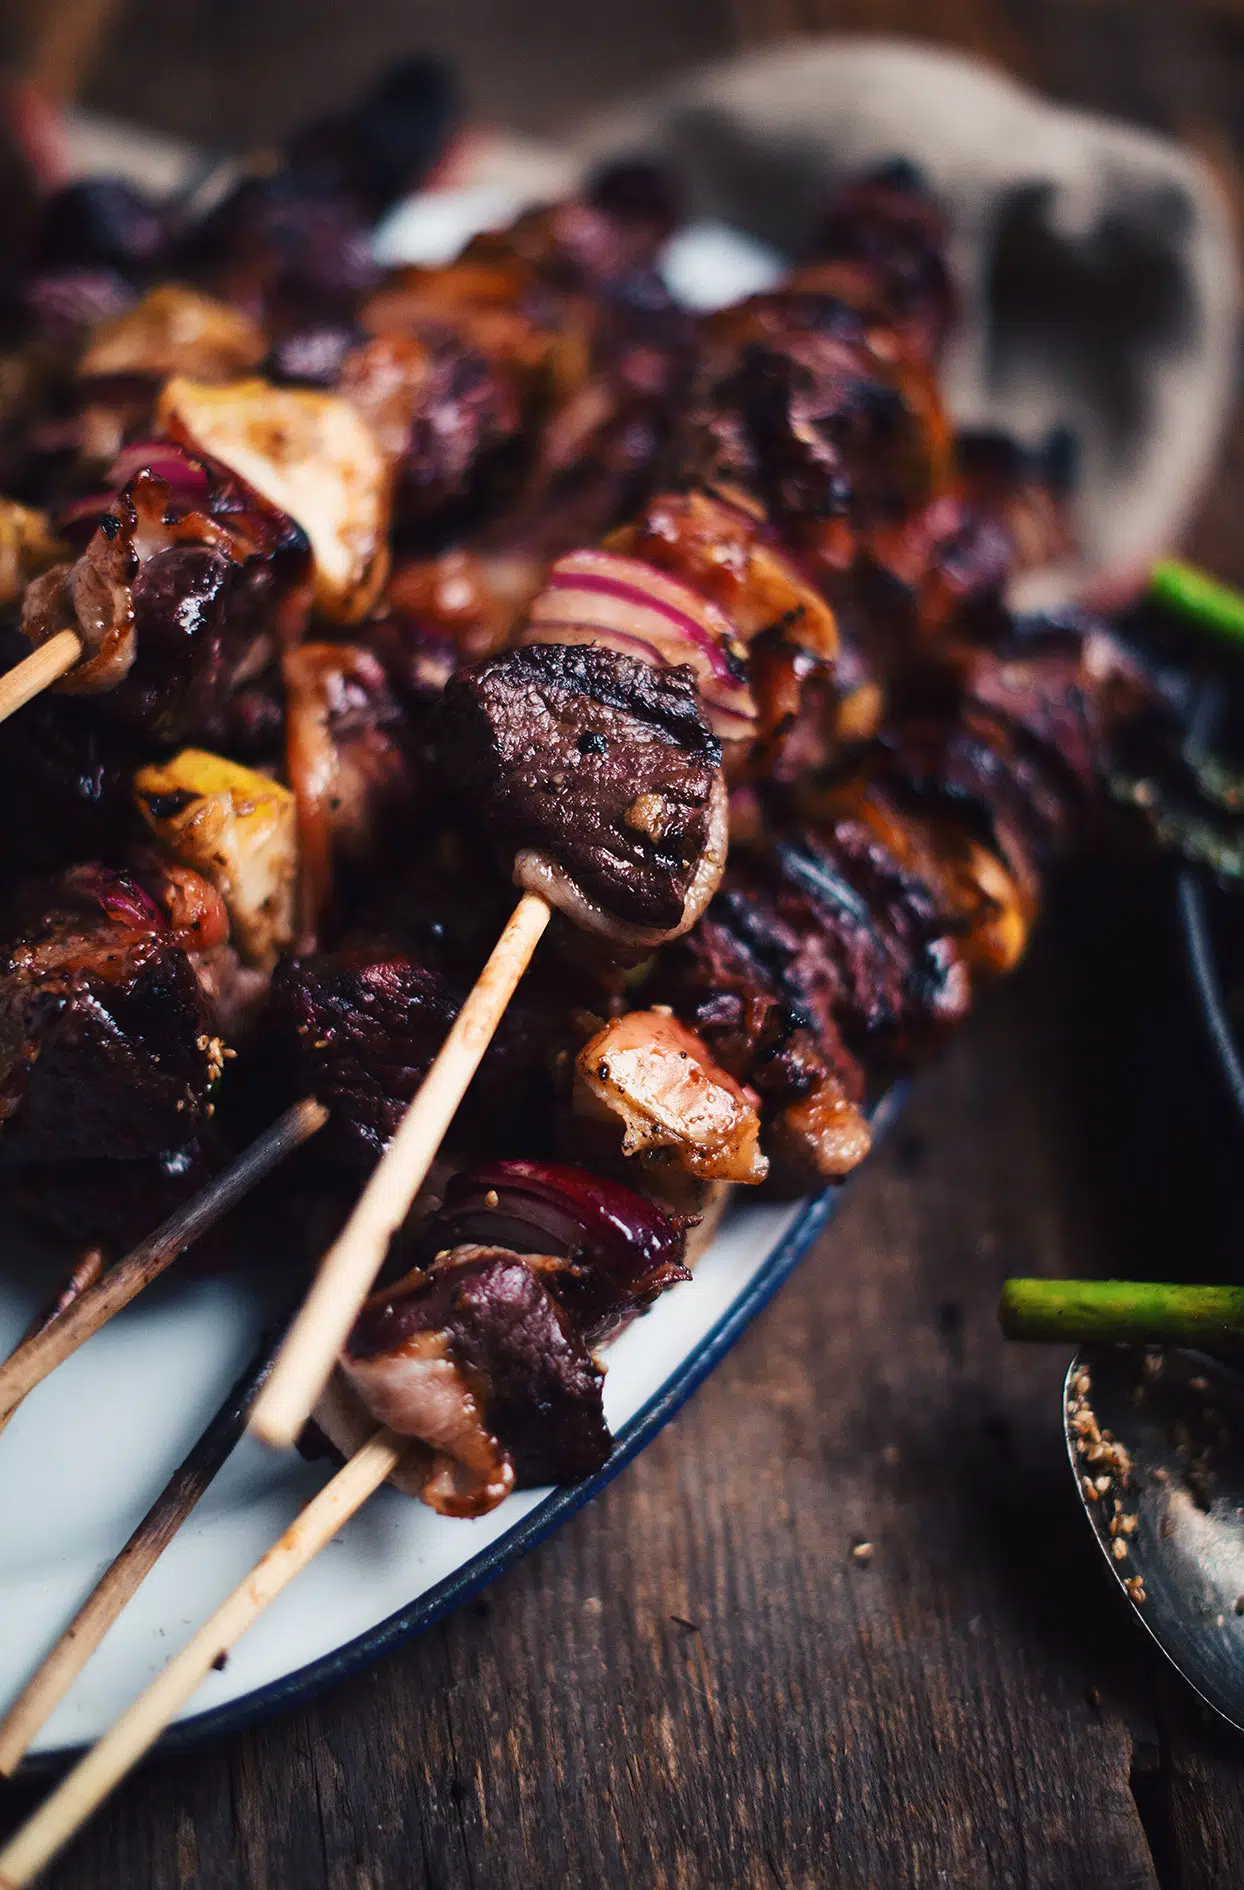 Venison skewers with apples and bacon